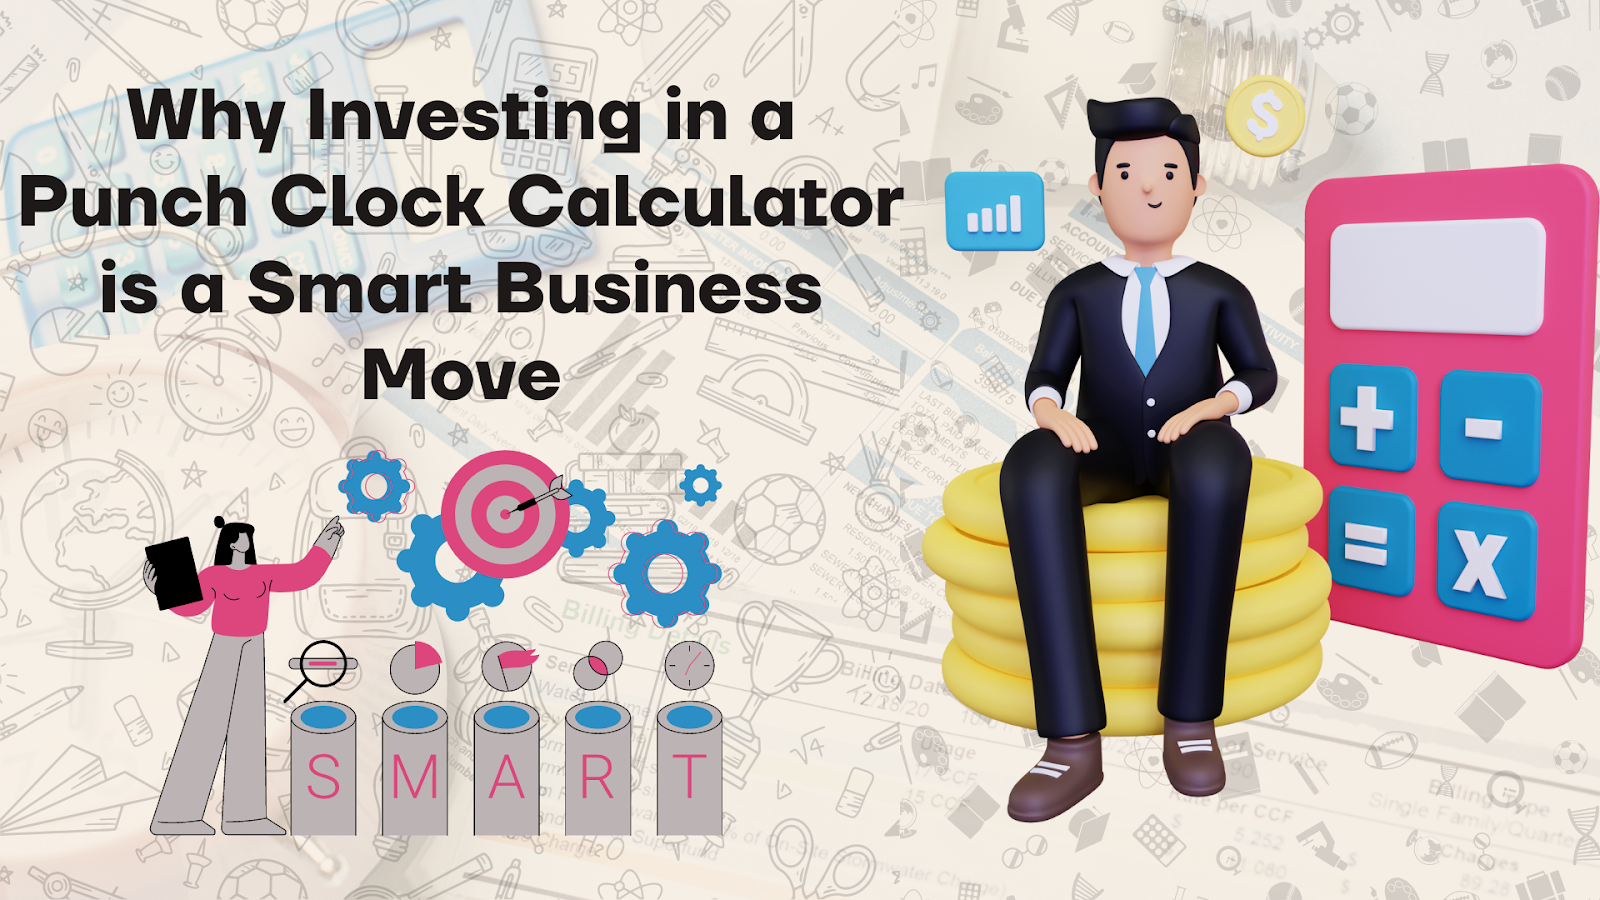 Why Investing in a Punch Clock Calculator is a Smart Business Move | Punch Clock Calculator